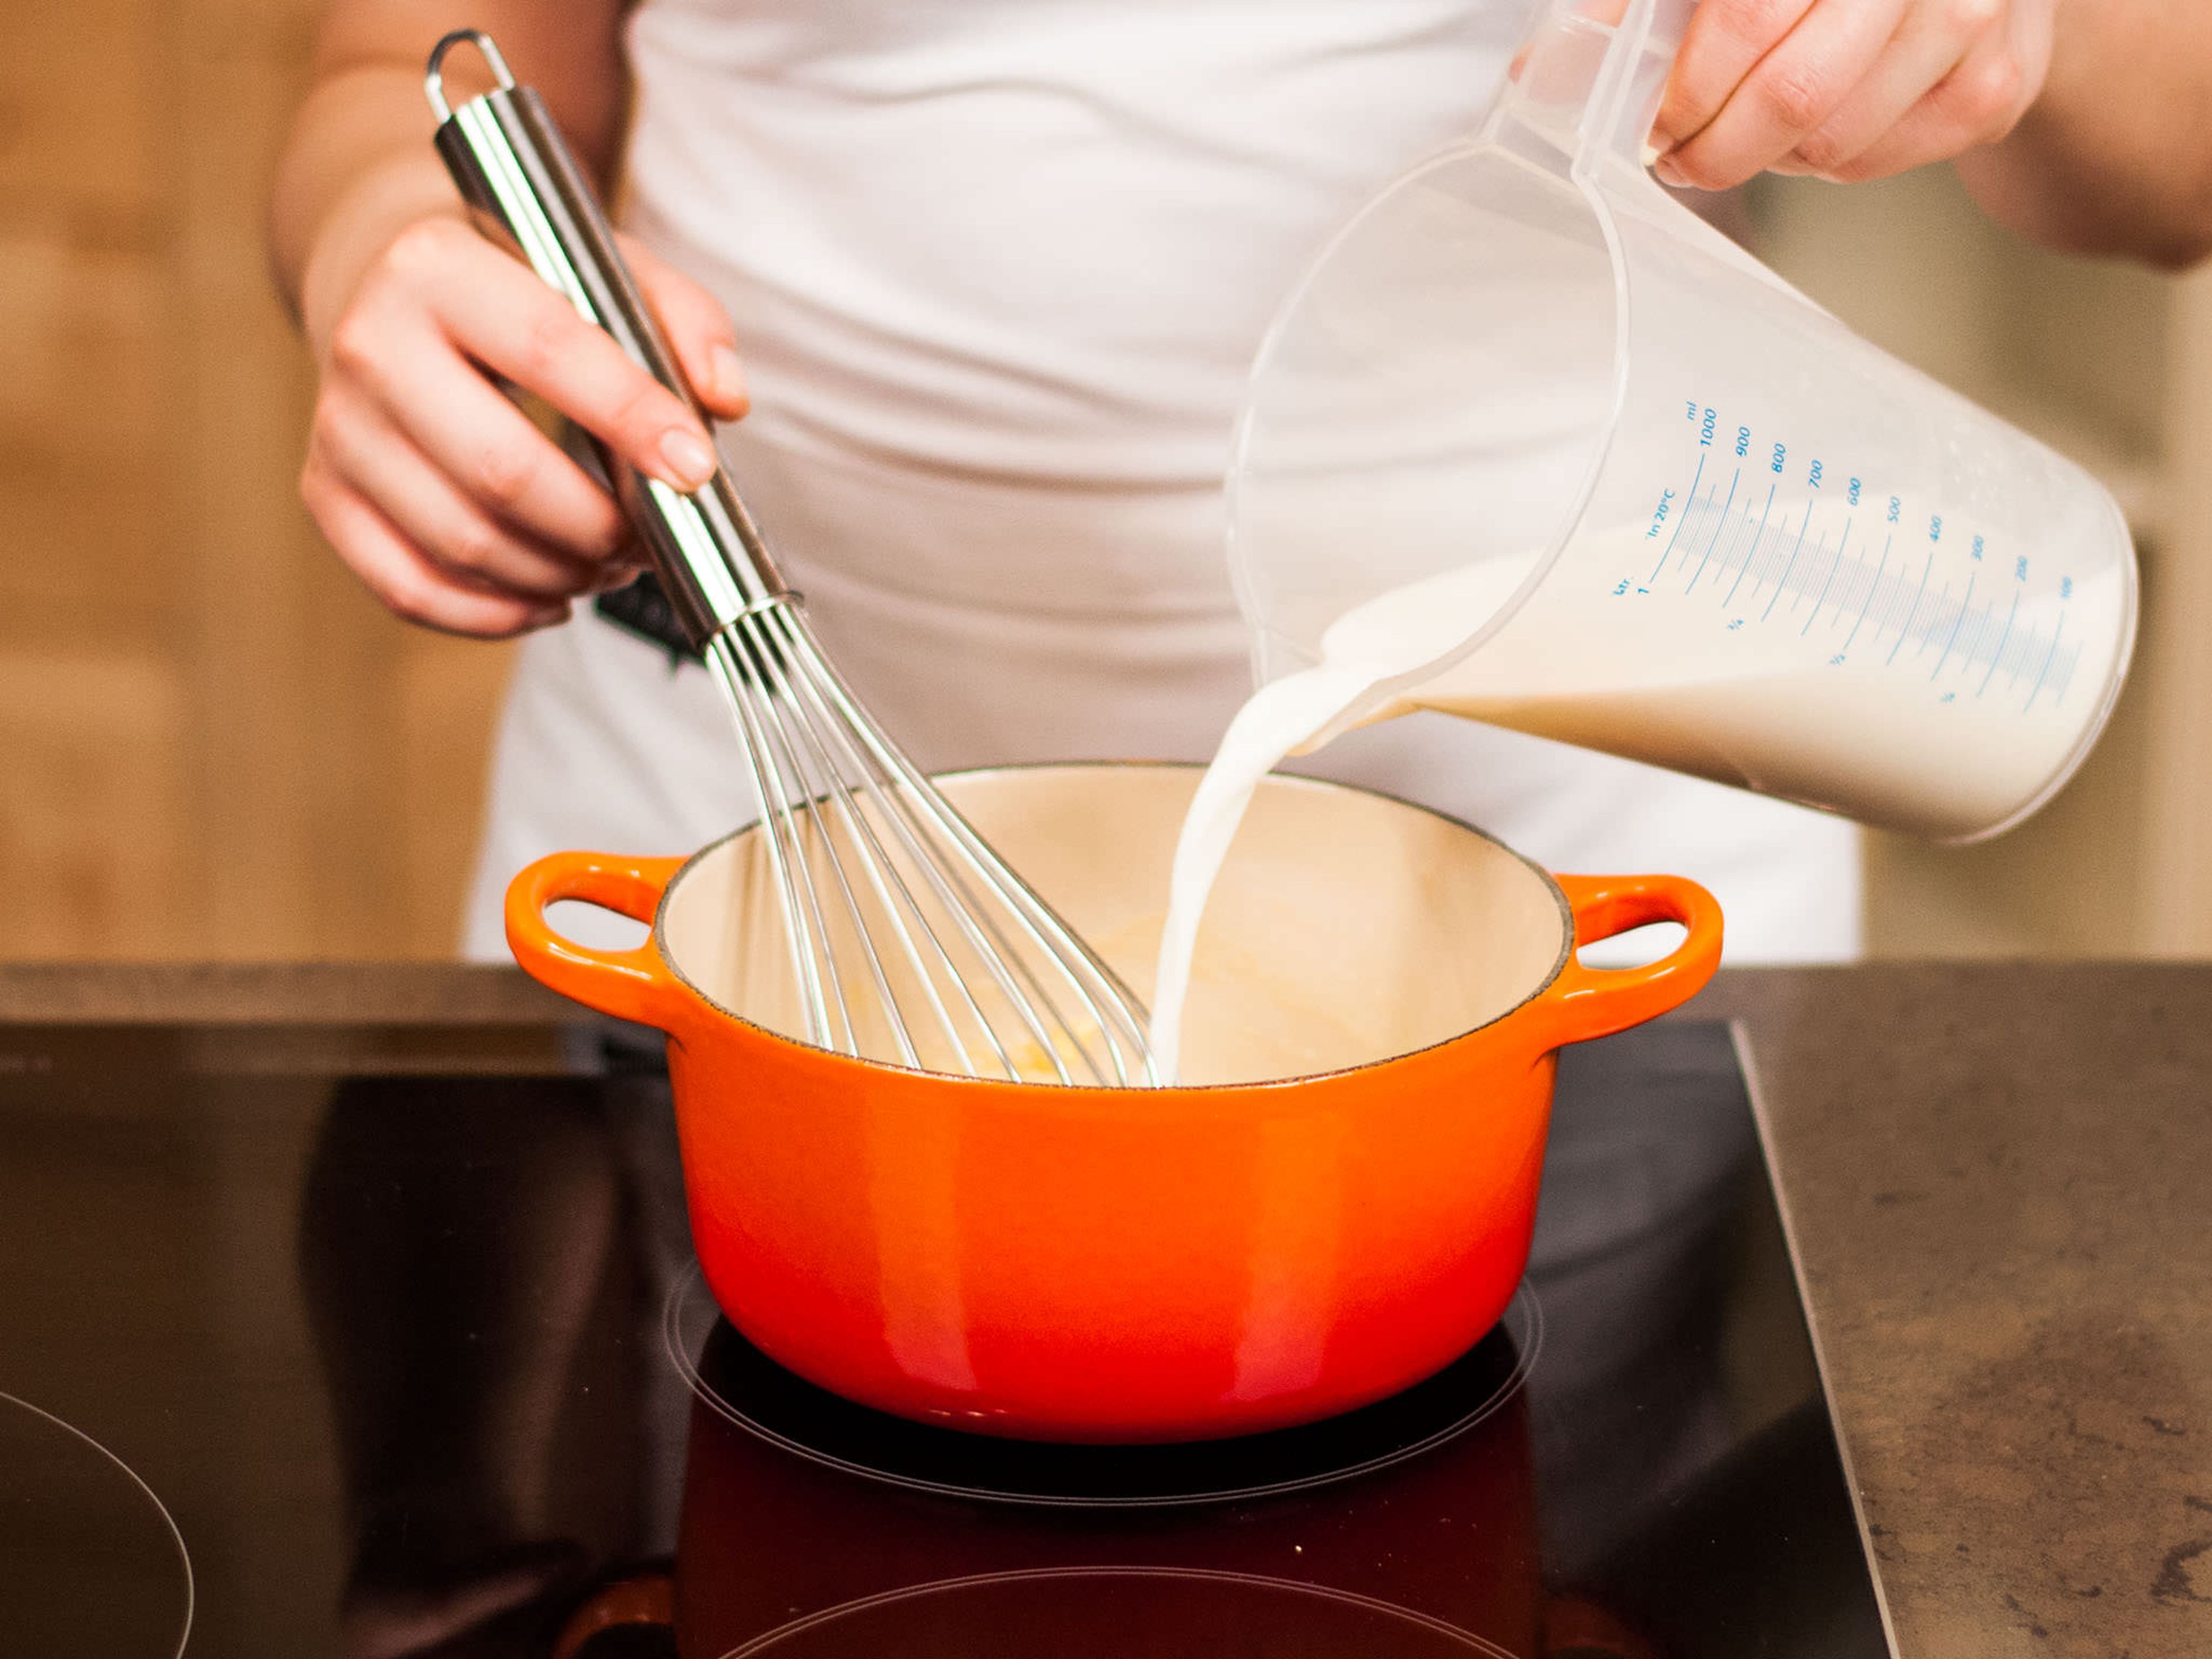 In a saucepan, melt butter, add flour, and stir until flour and butter are fully combined to form a roux. Add milk, stirring occasionally, until fully combined. Season generously with nutmeg, salt, and pepper.